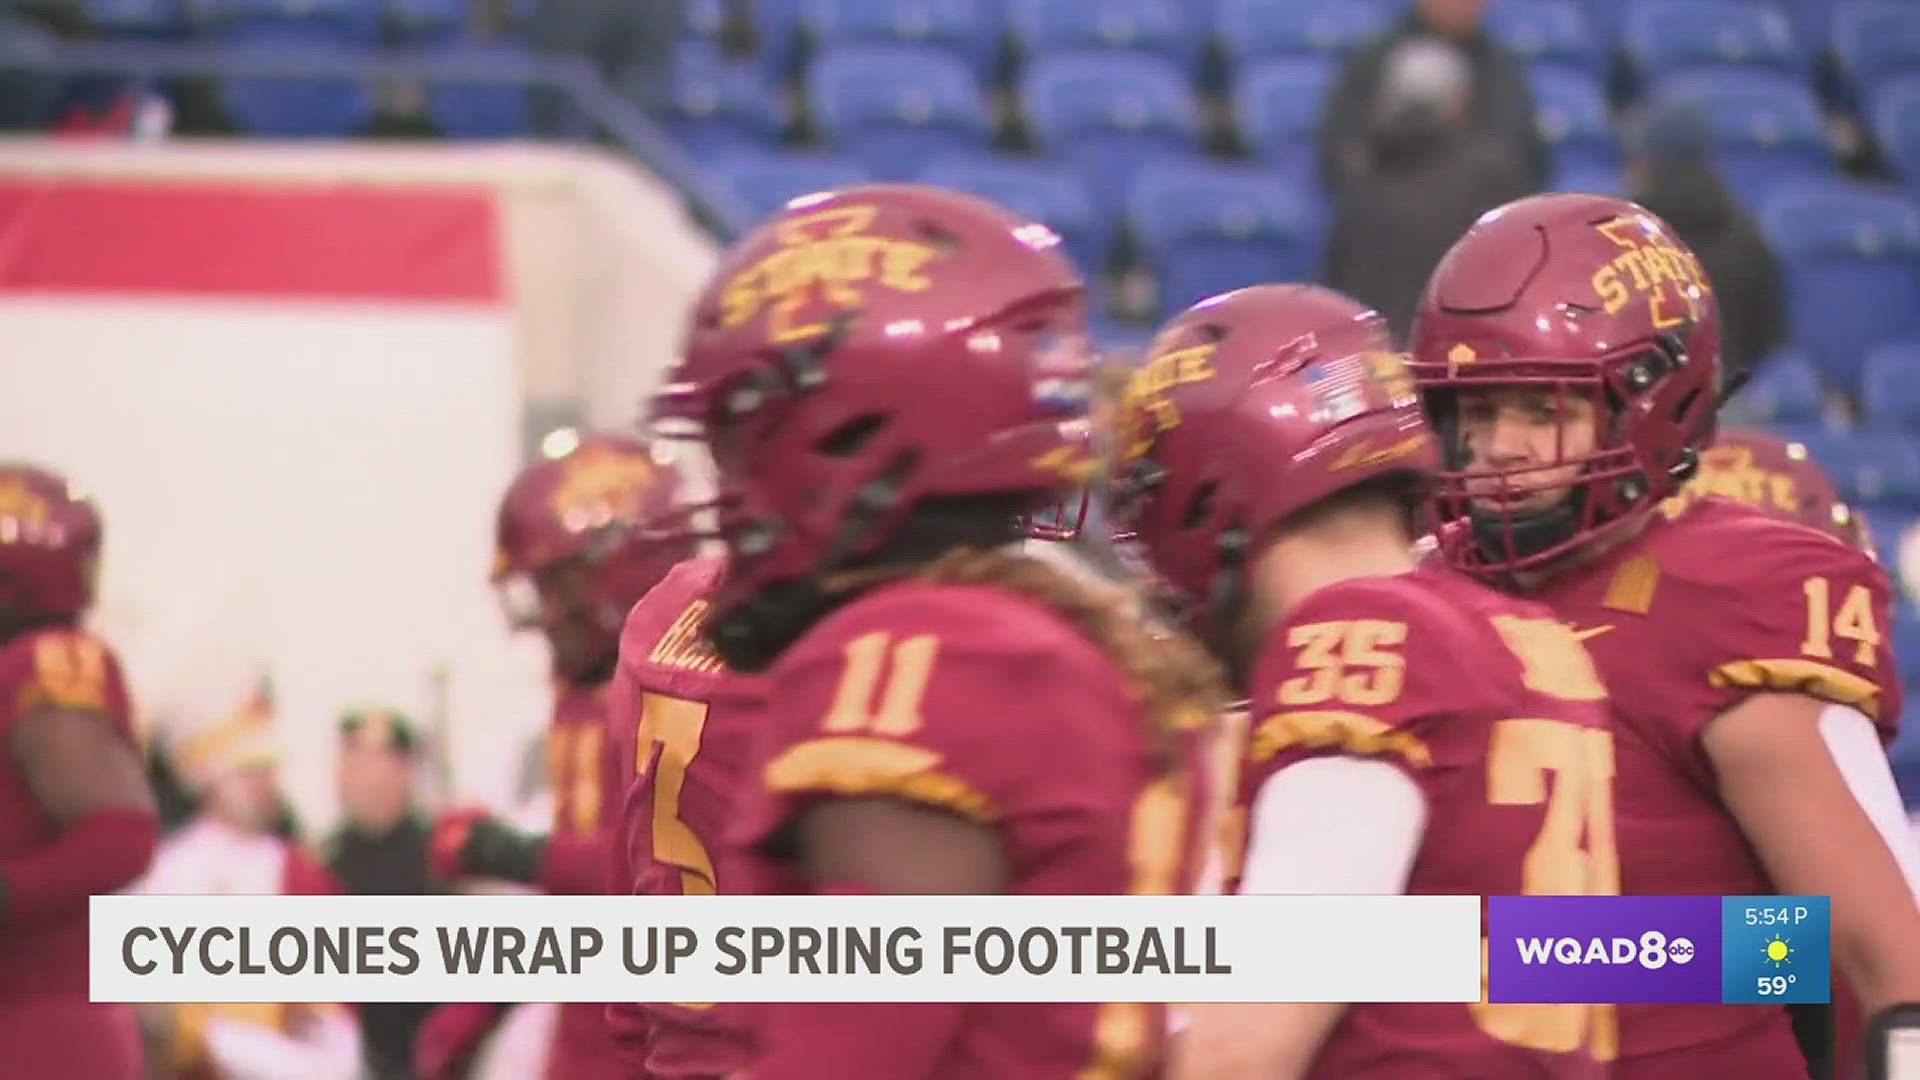 The team had many of its top players sit out of the spring game to avoid injuries.